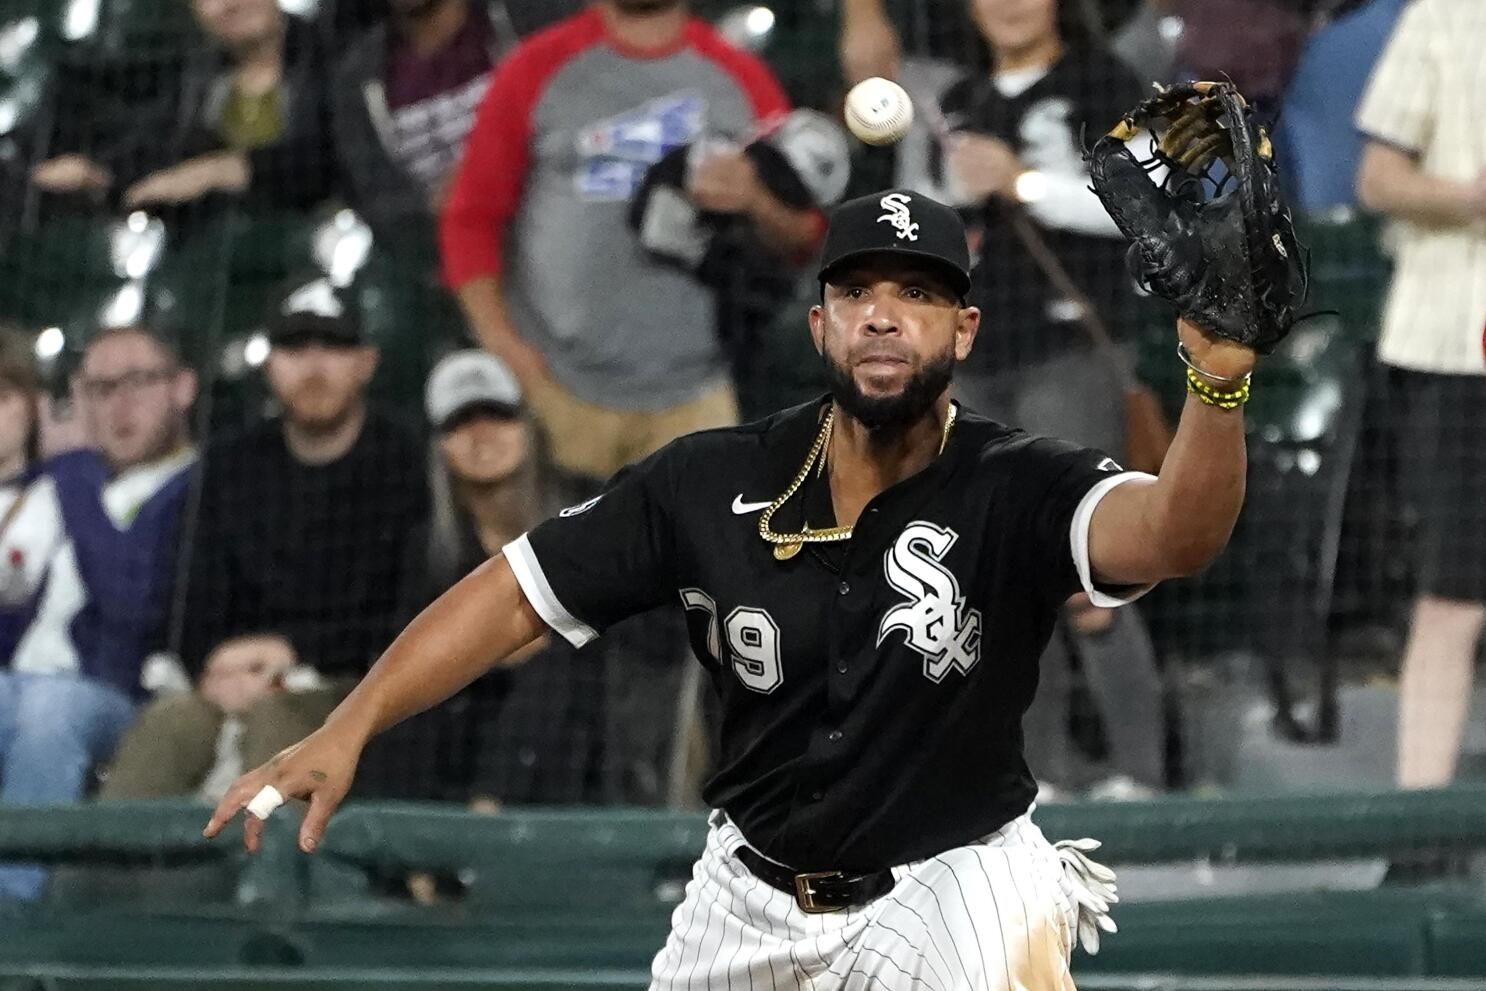 White Sox still have time to rebound in 2022